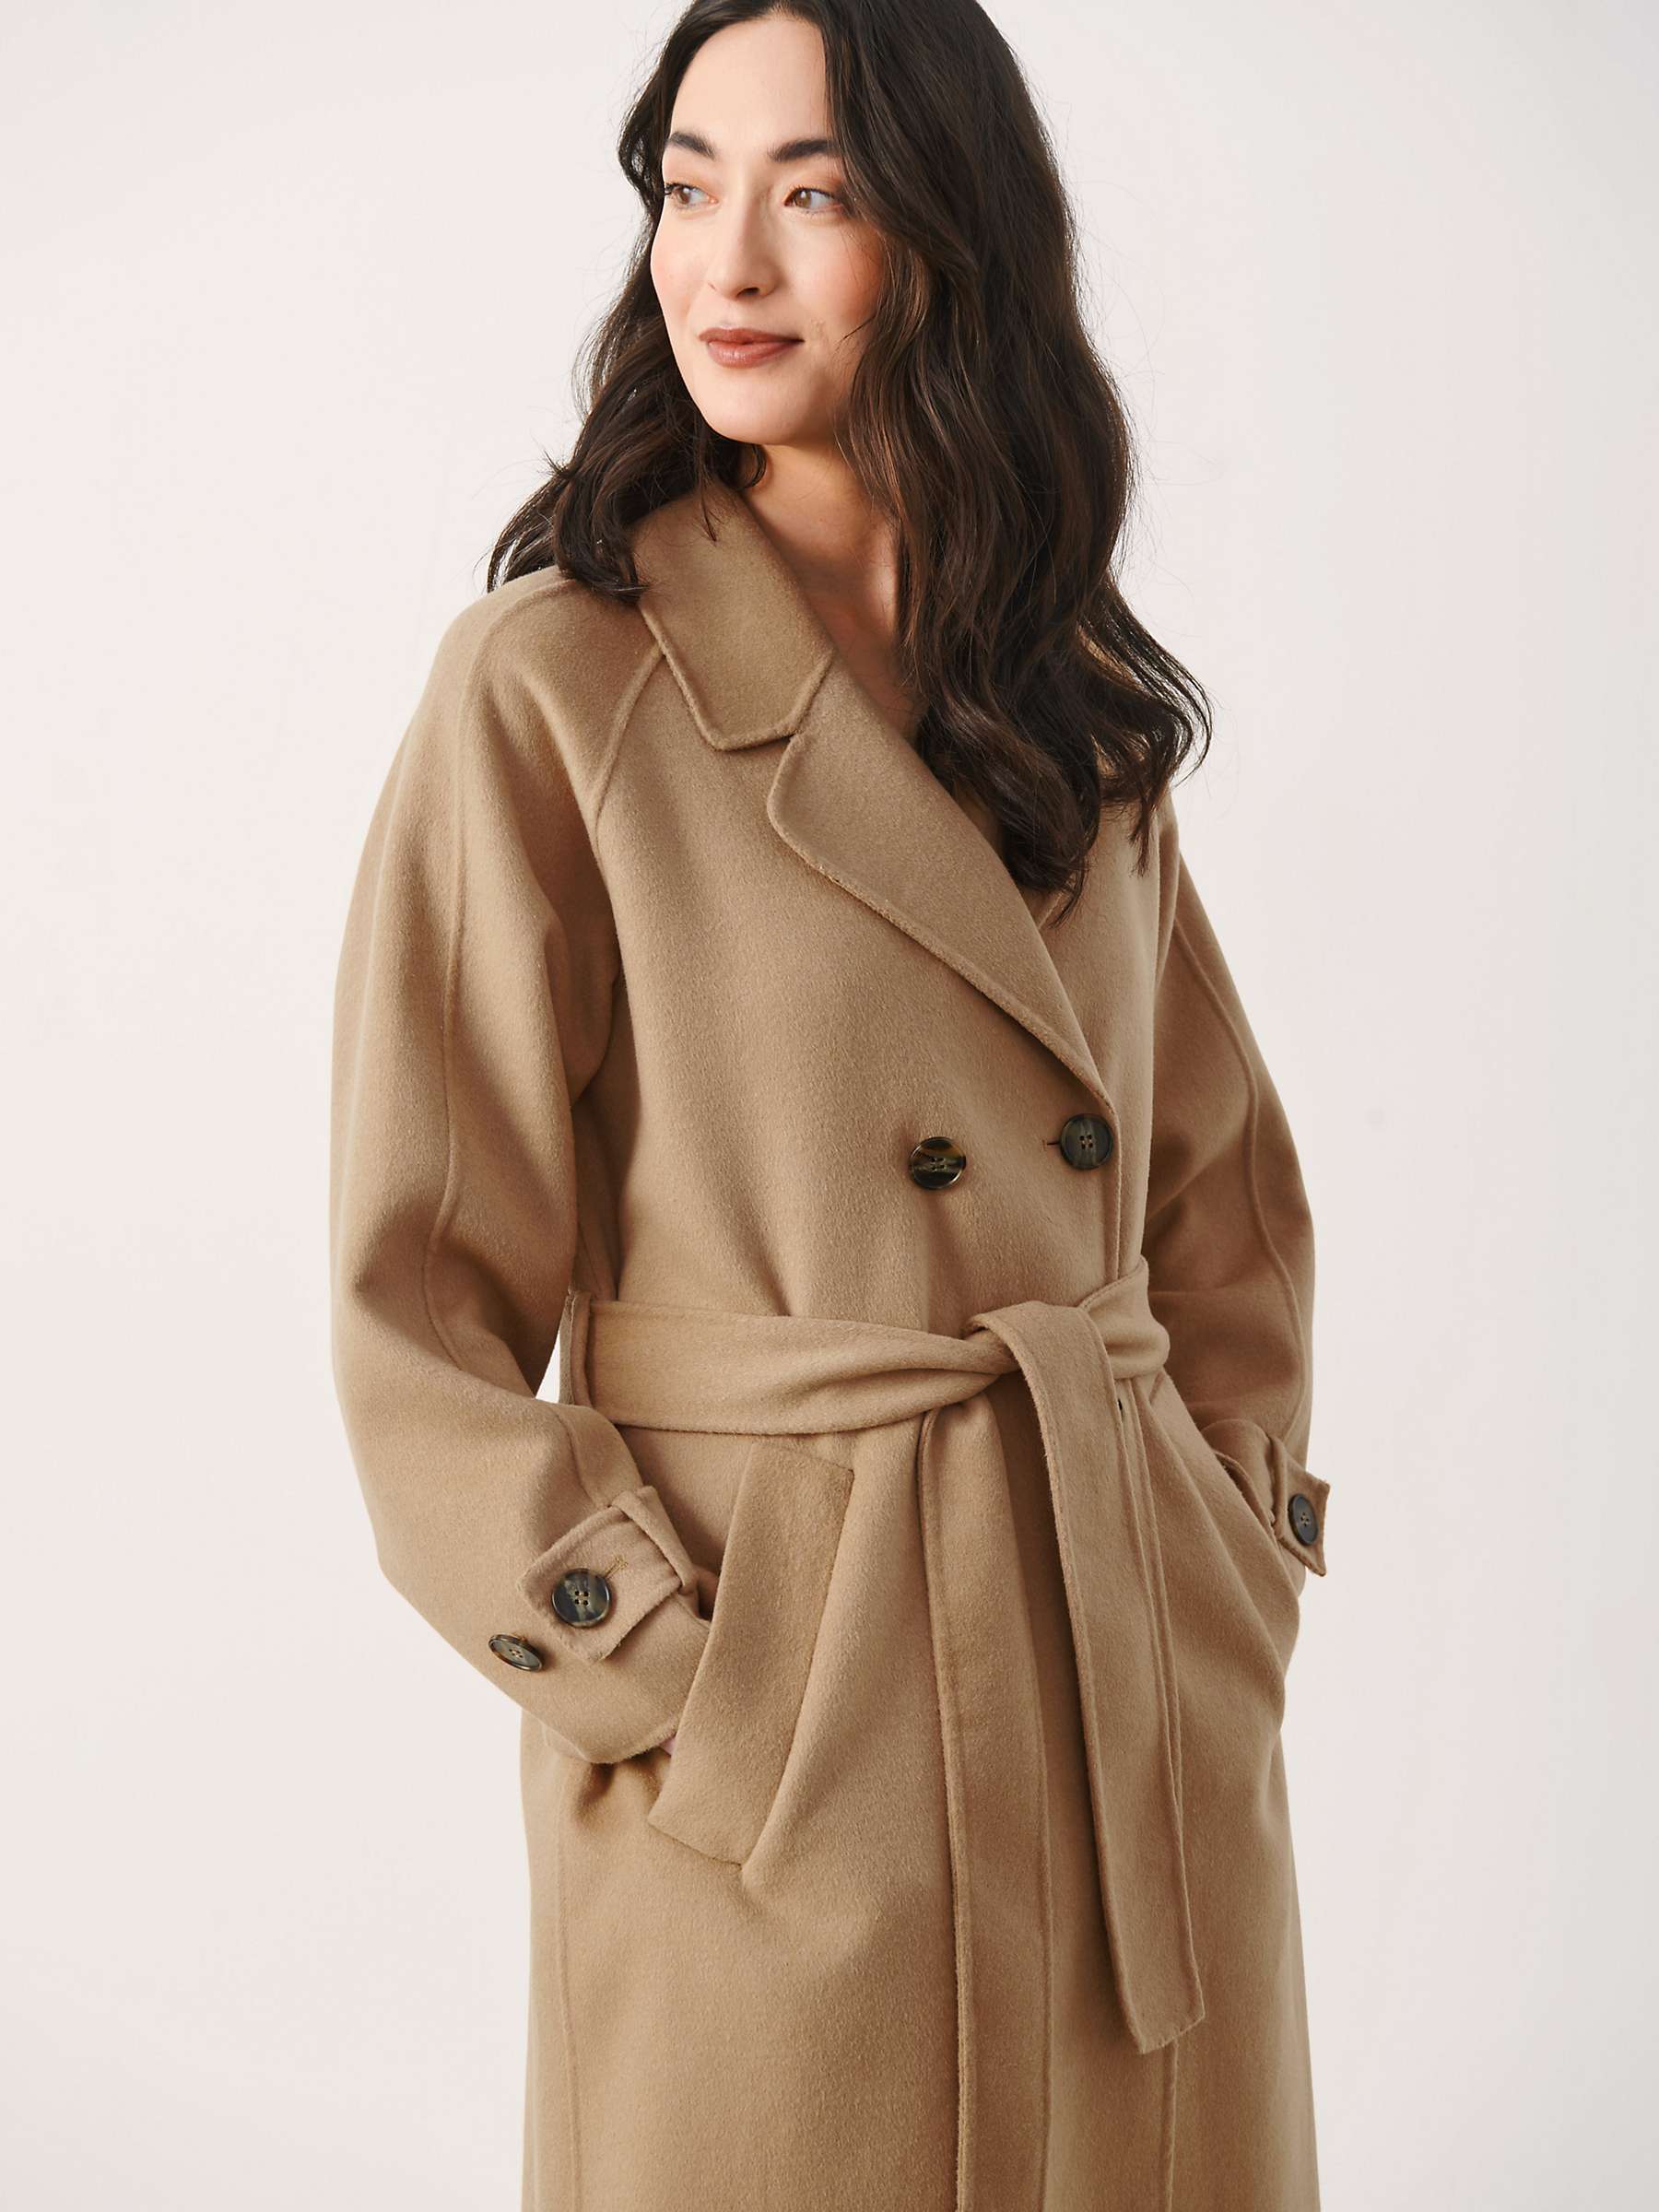 Buy Part Two Christina Wool Blend Trench Coat Online at johnlewis.com